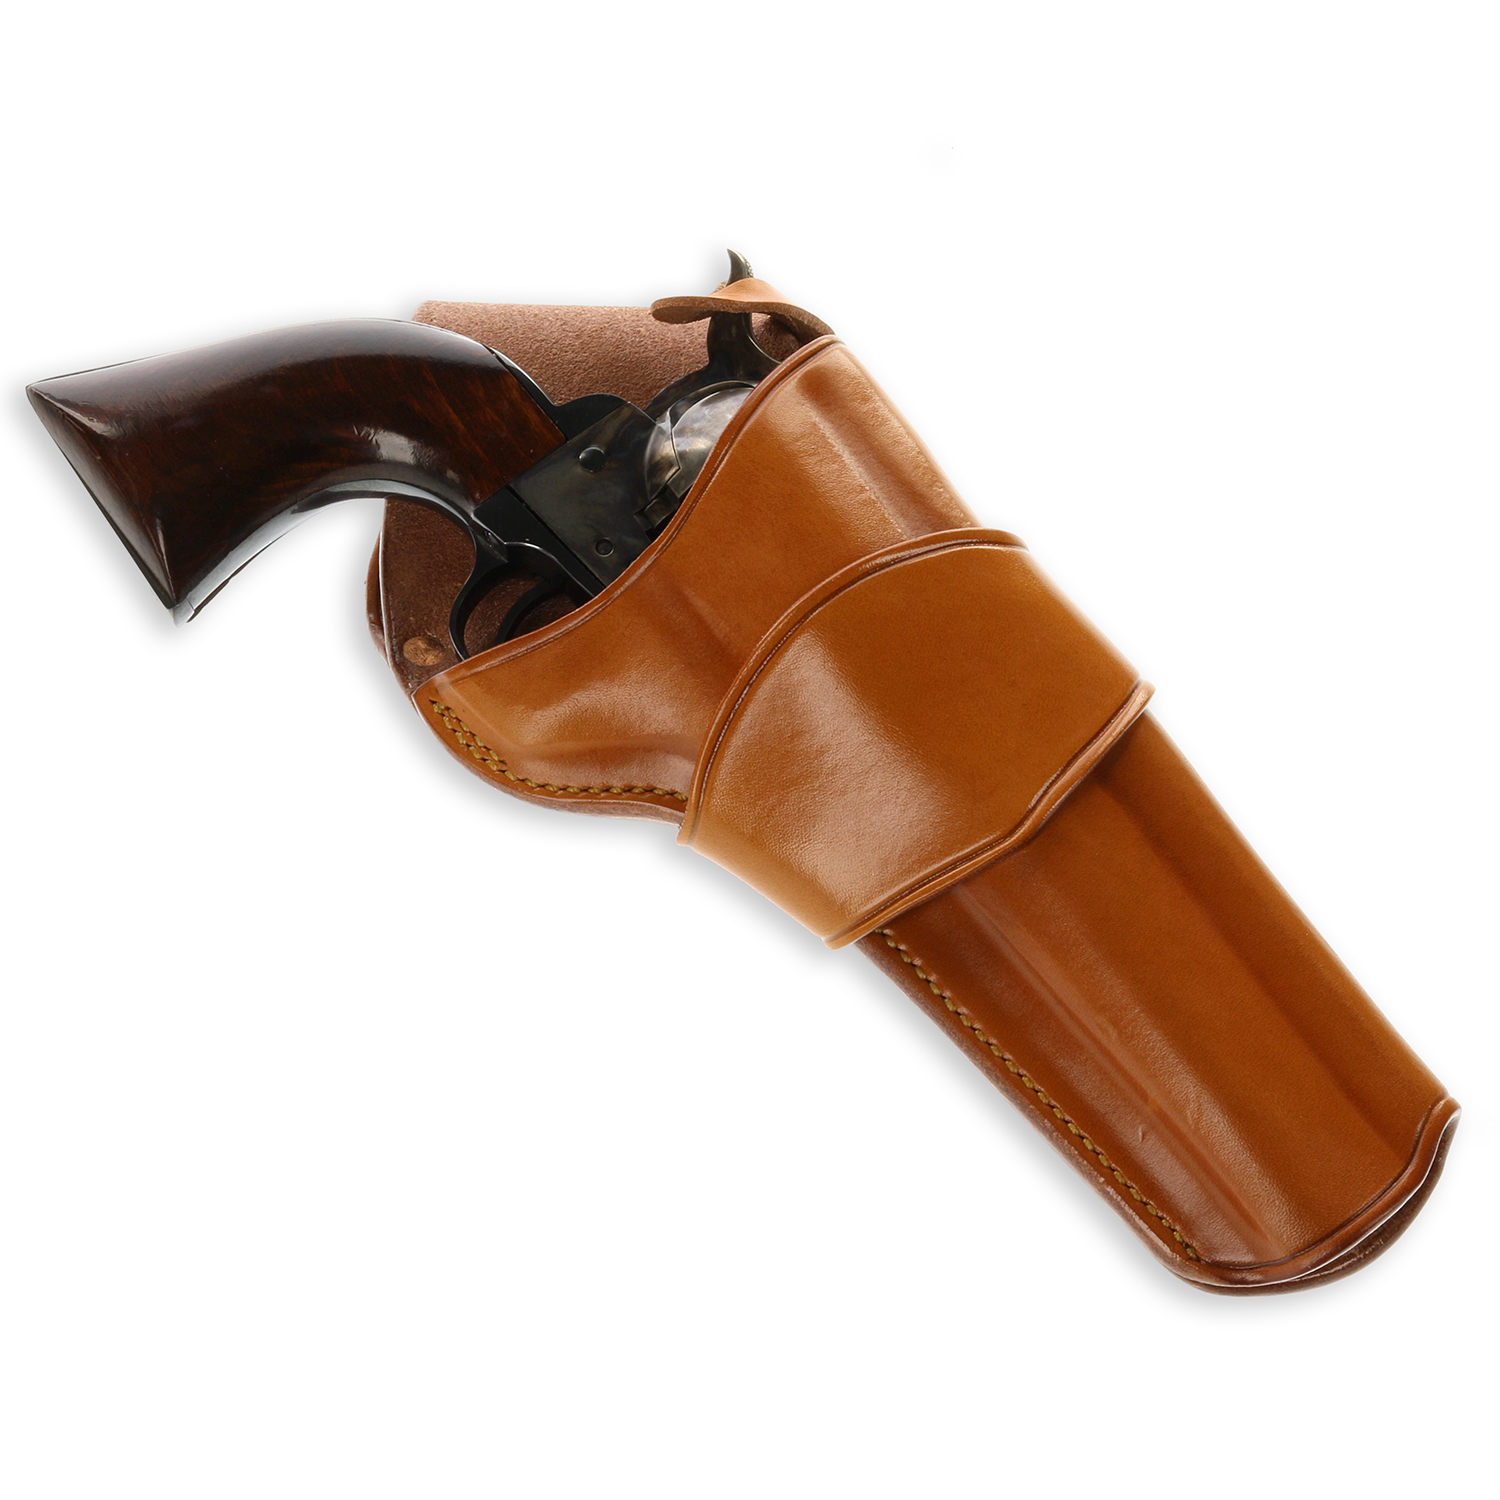 Western Leather Gun Holster Single Action Revolver CROSS DRAW Colt Sass Ruger 